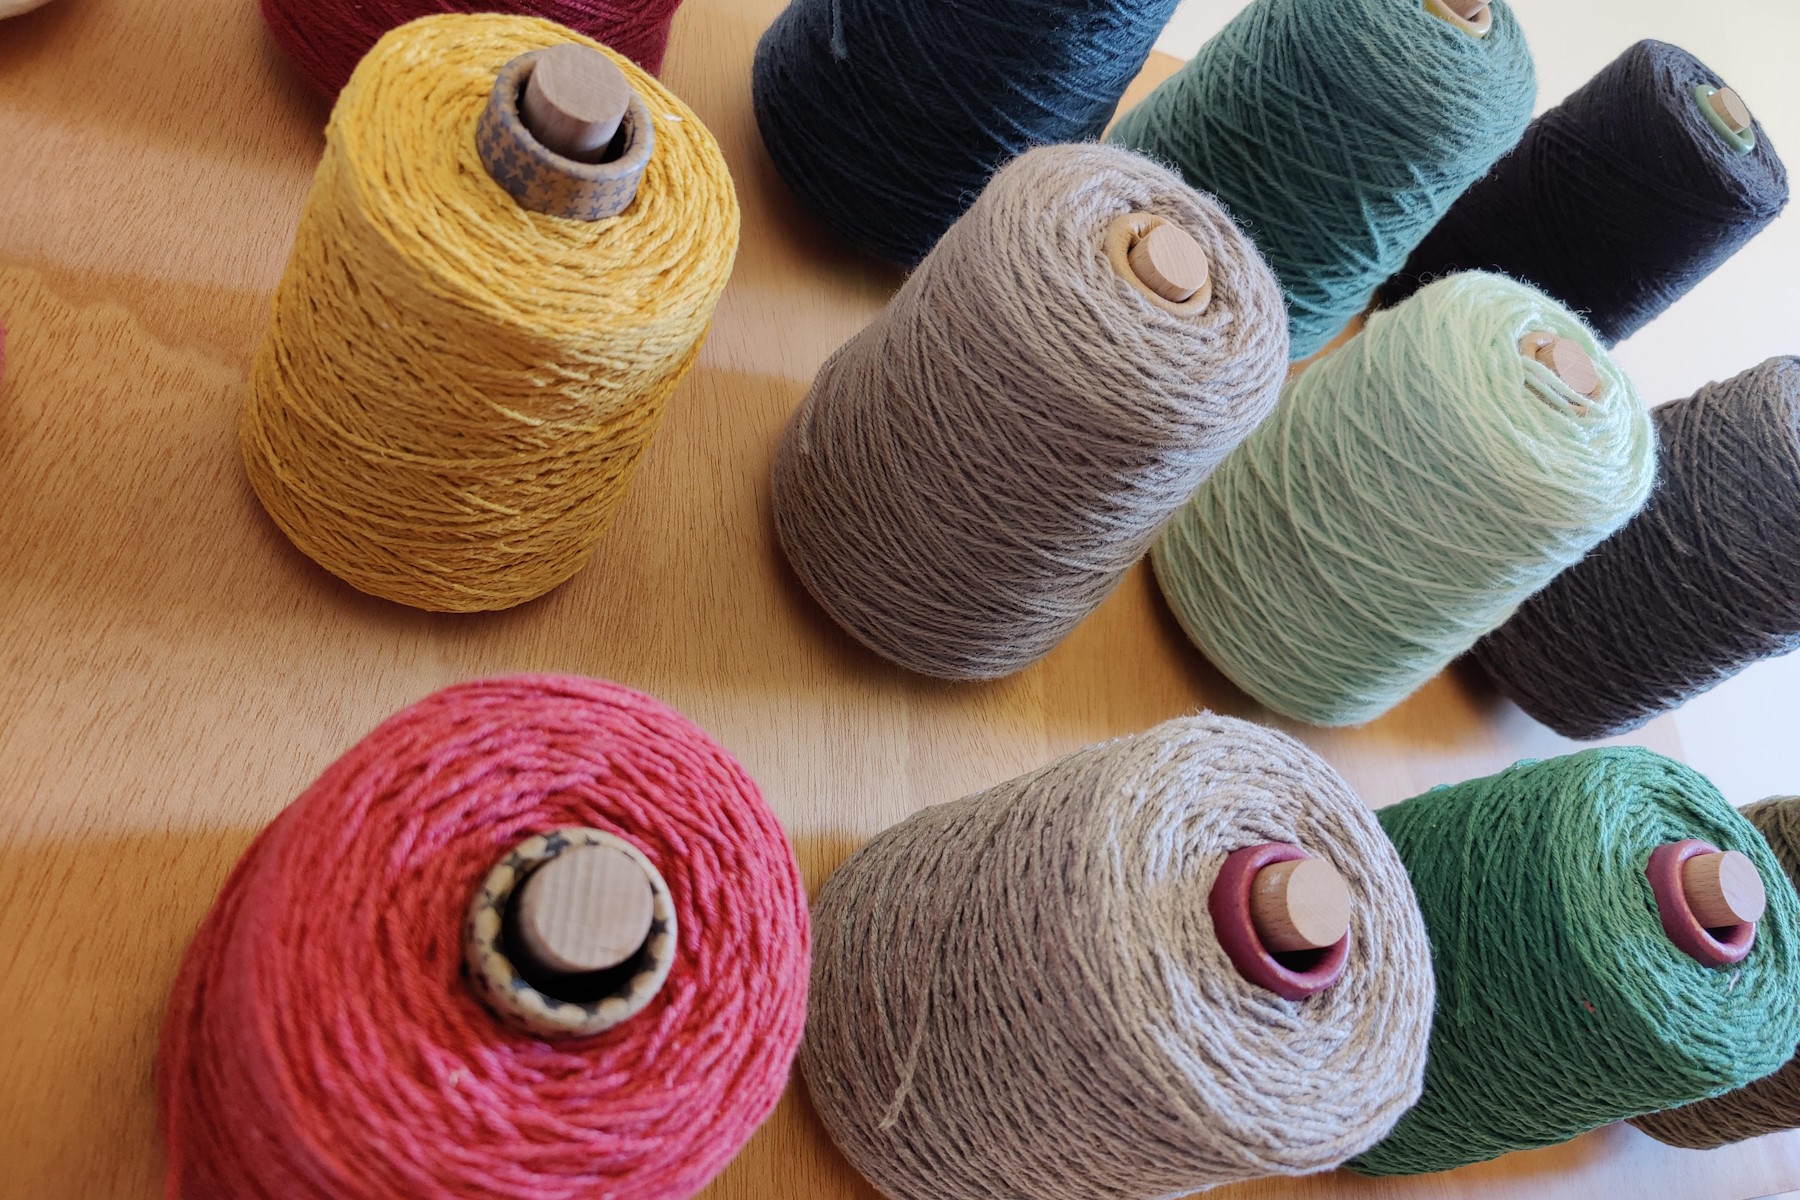 Cones of yarn for tufting featured